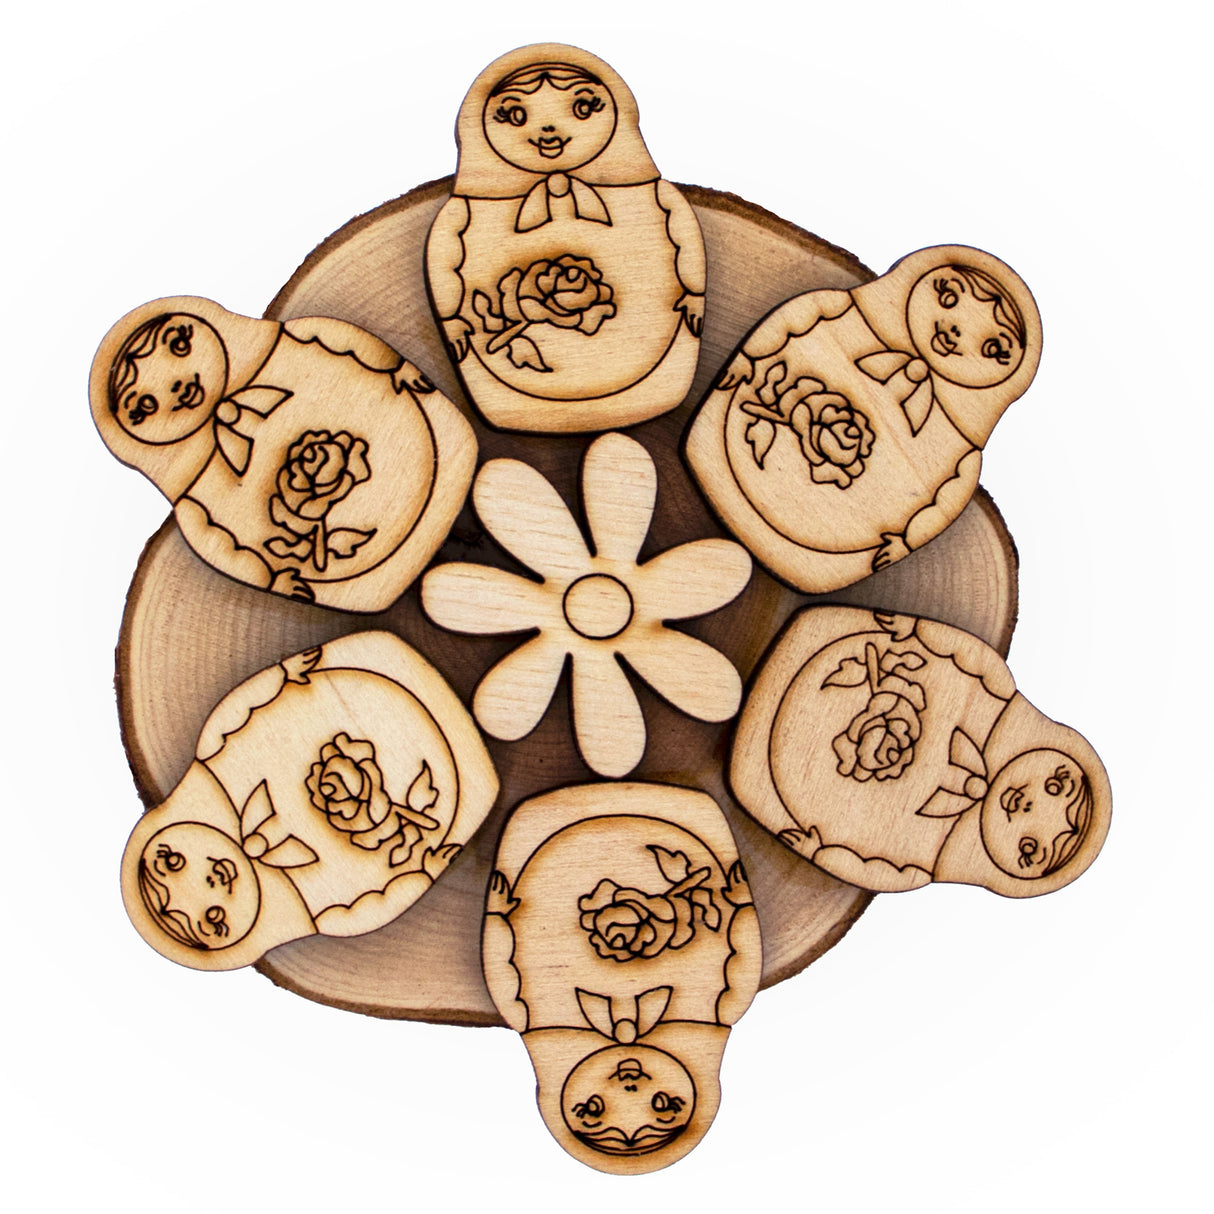 Wooden Matryoshka Coaster for Drinks, Table Coaster in Beige color, Star shape